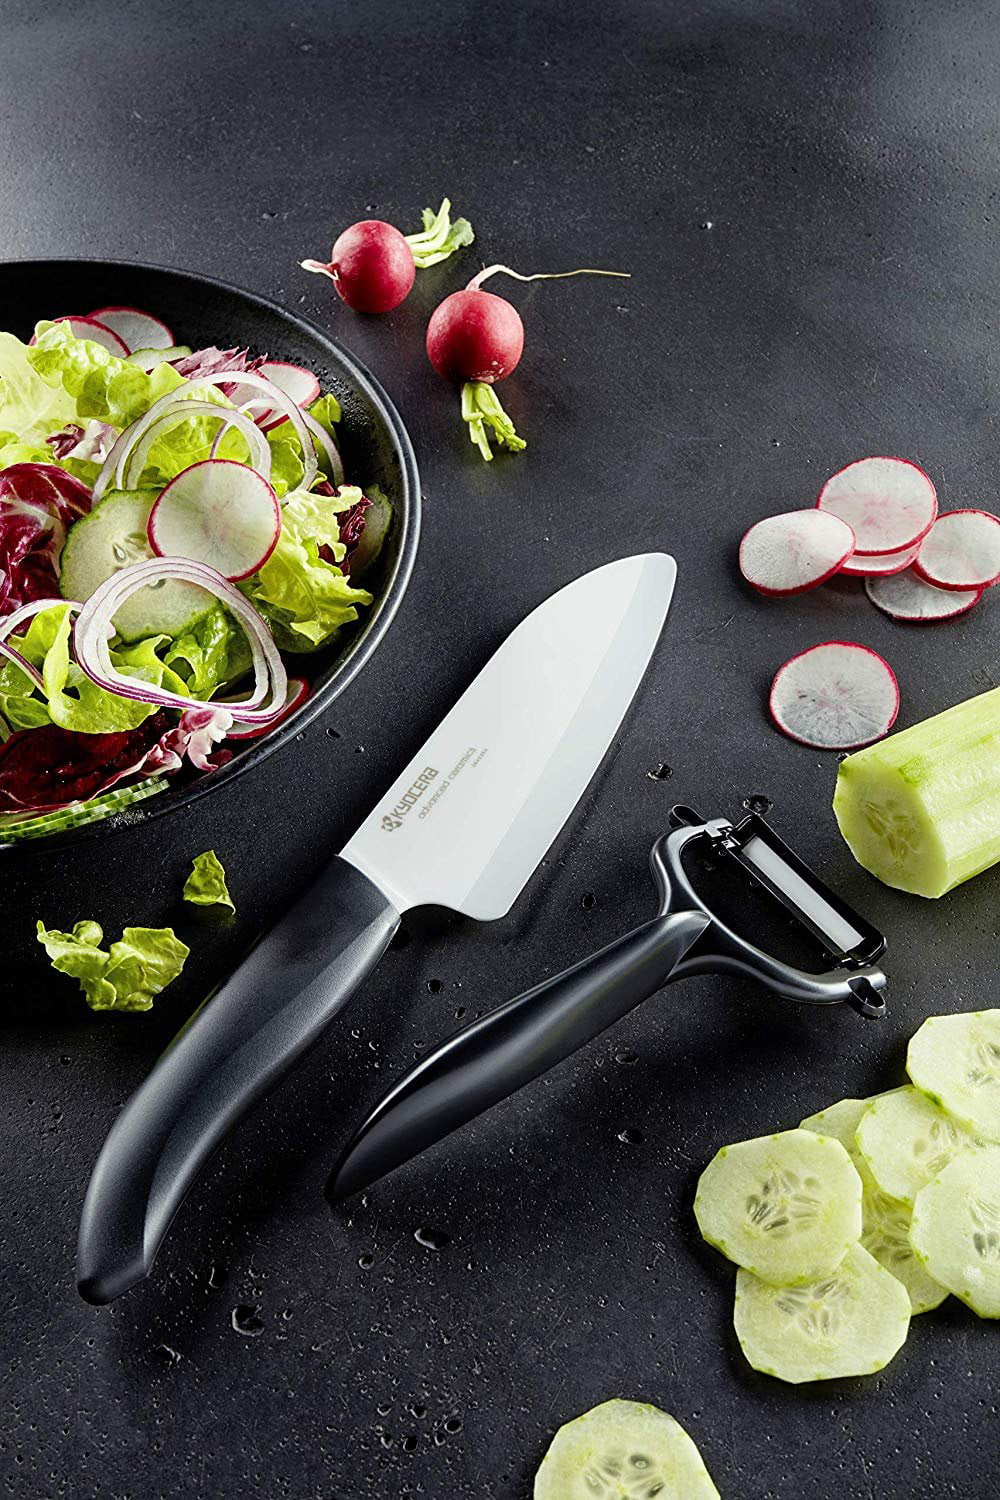 Kyocera 3” Paring w/ Double Edge Peeler Review - Product Review Cafe